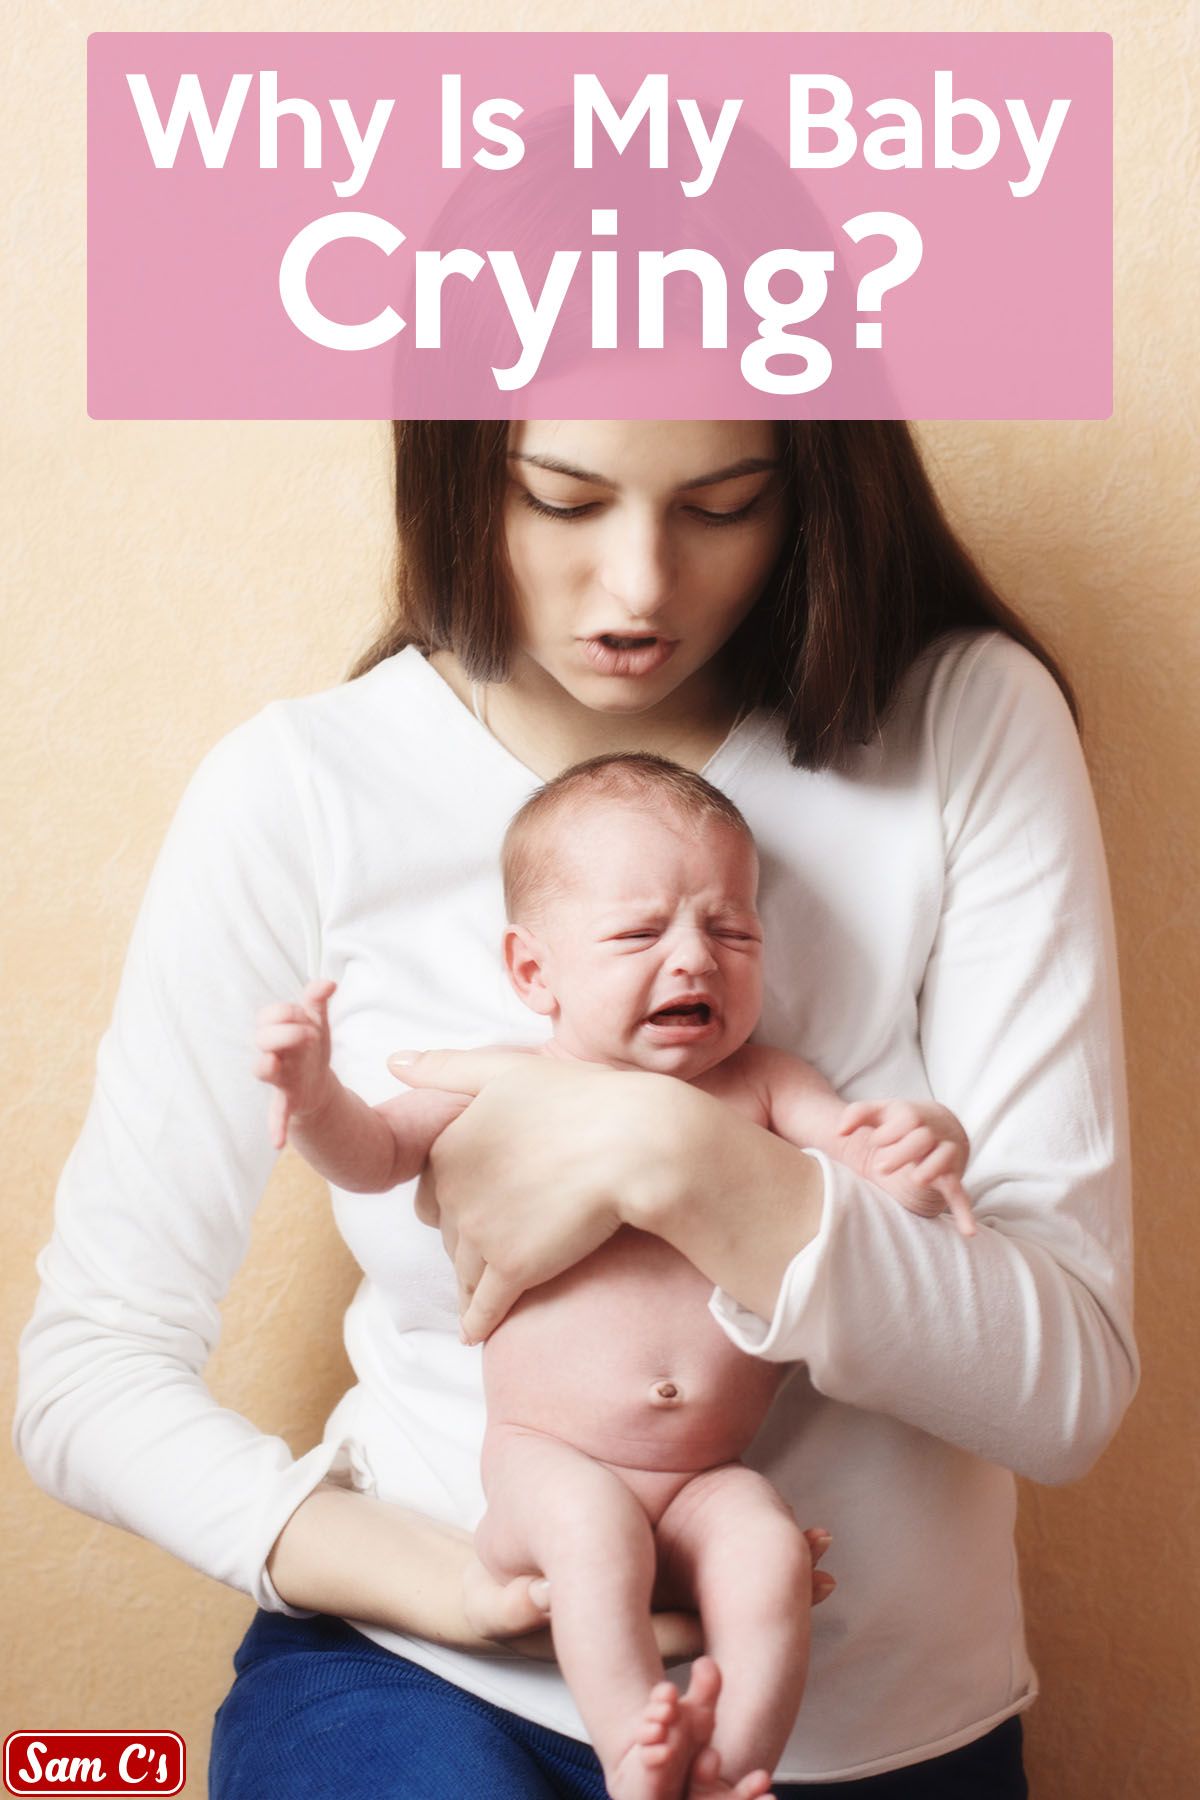 Why is my baby crying?